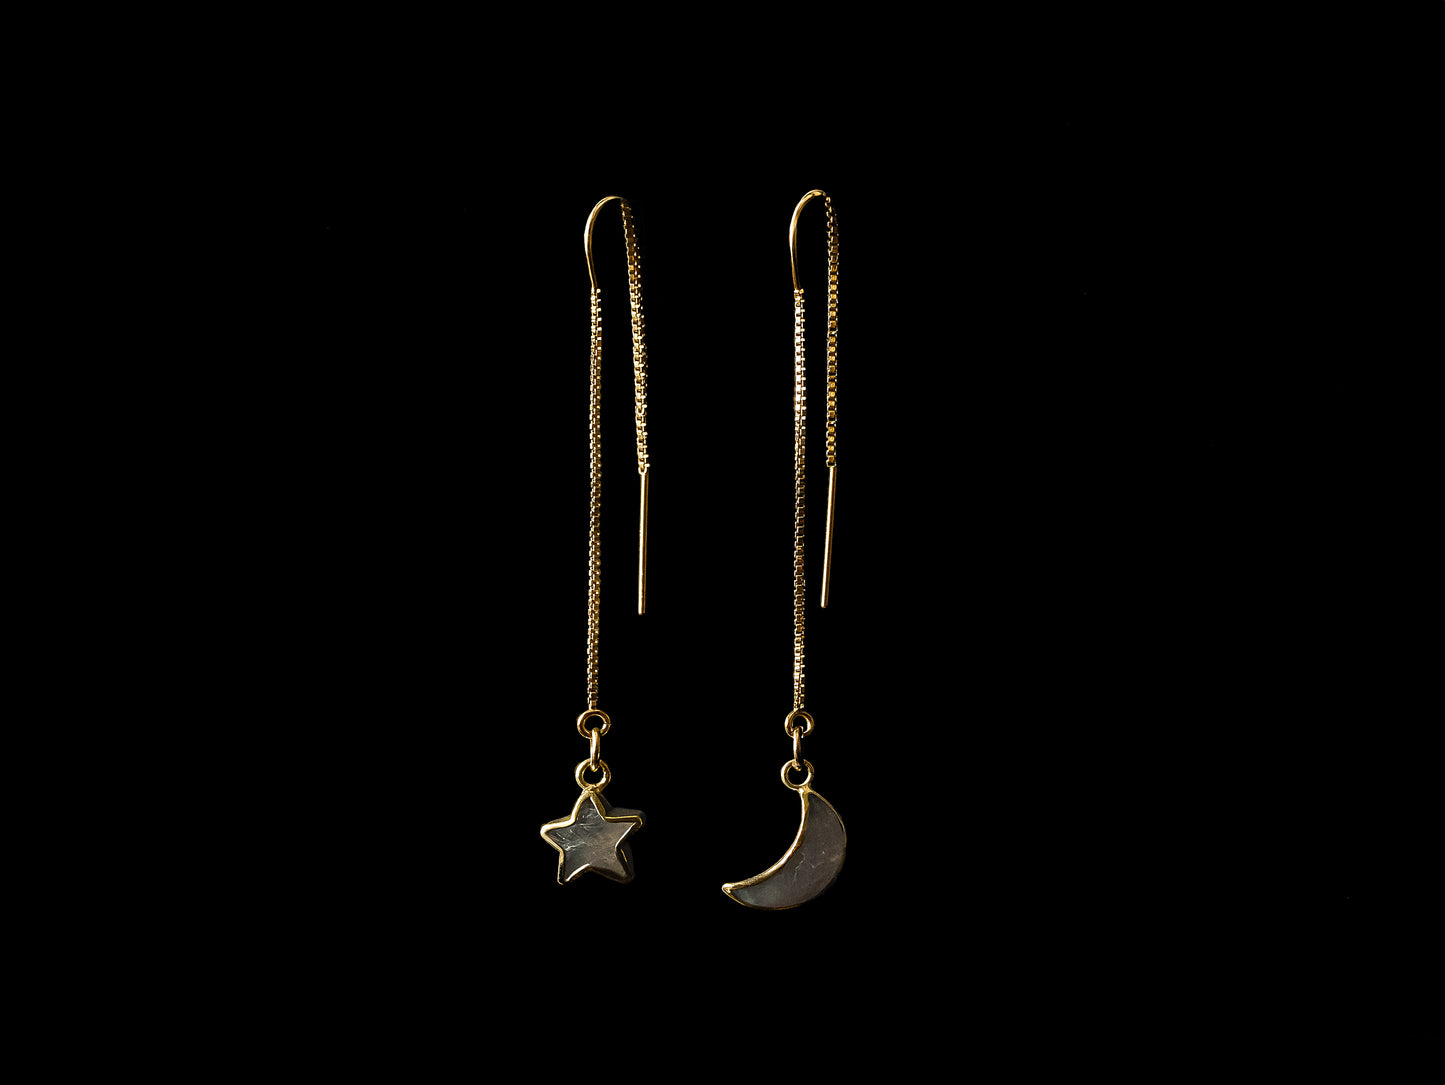 Earrings - Ear Threaders Gold Filled Ear Wires with Gemstones